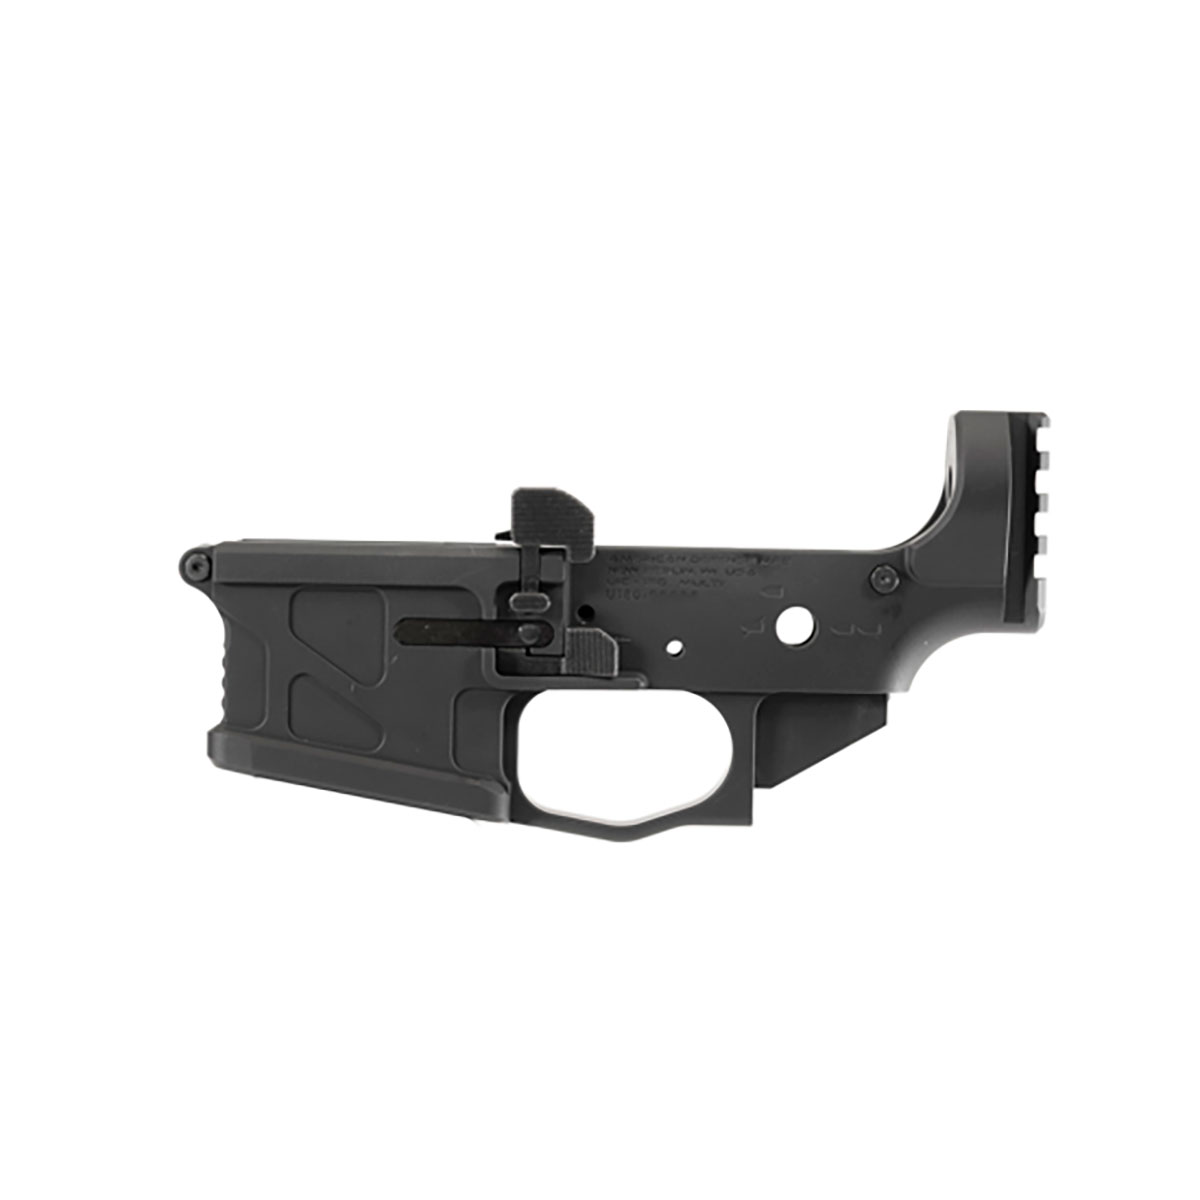 AMERICAN DEFENSE MANUFACTURING - UIC-180 STRIPPED LOWER AMBI RECEIVER